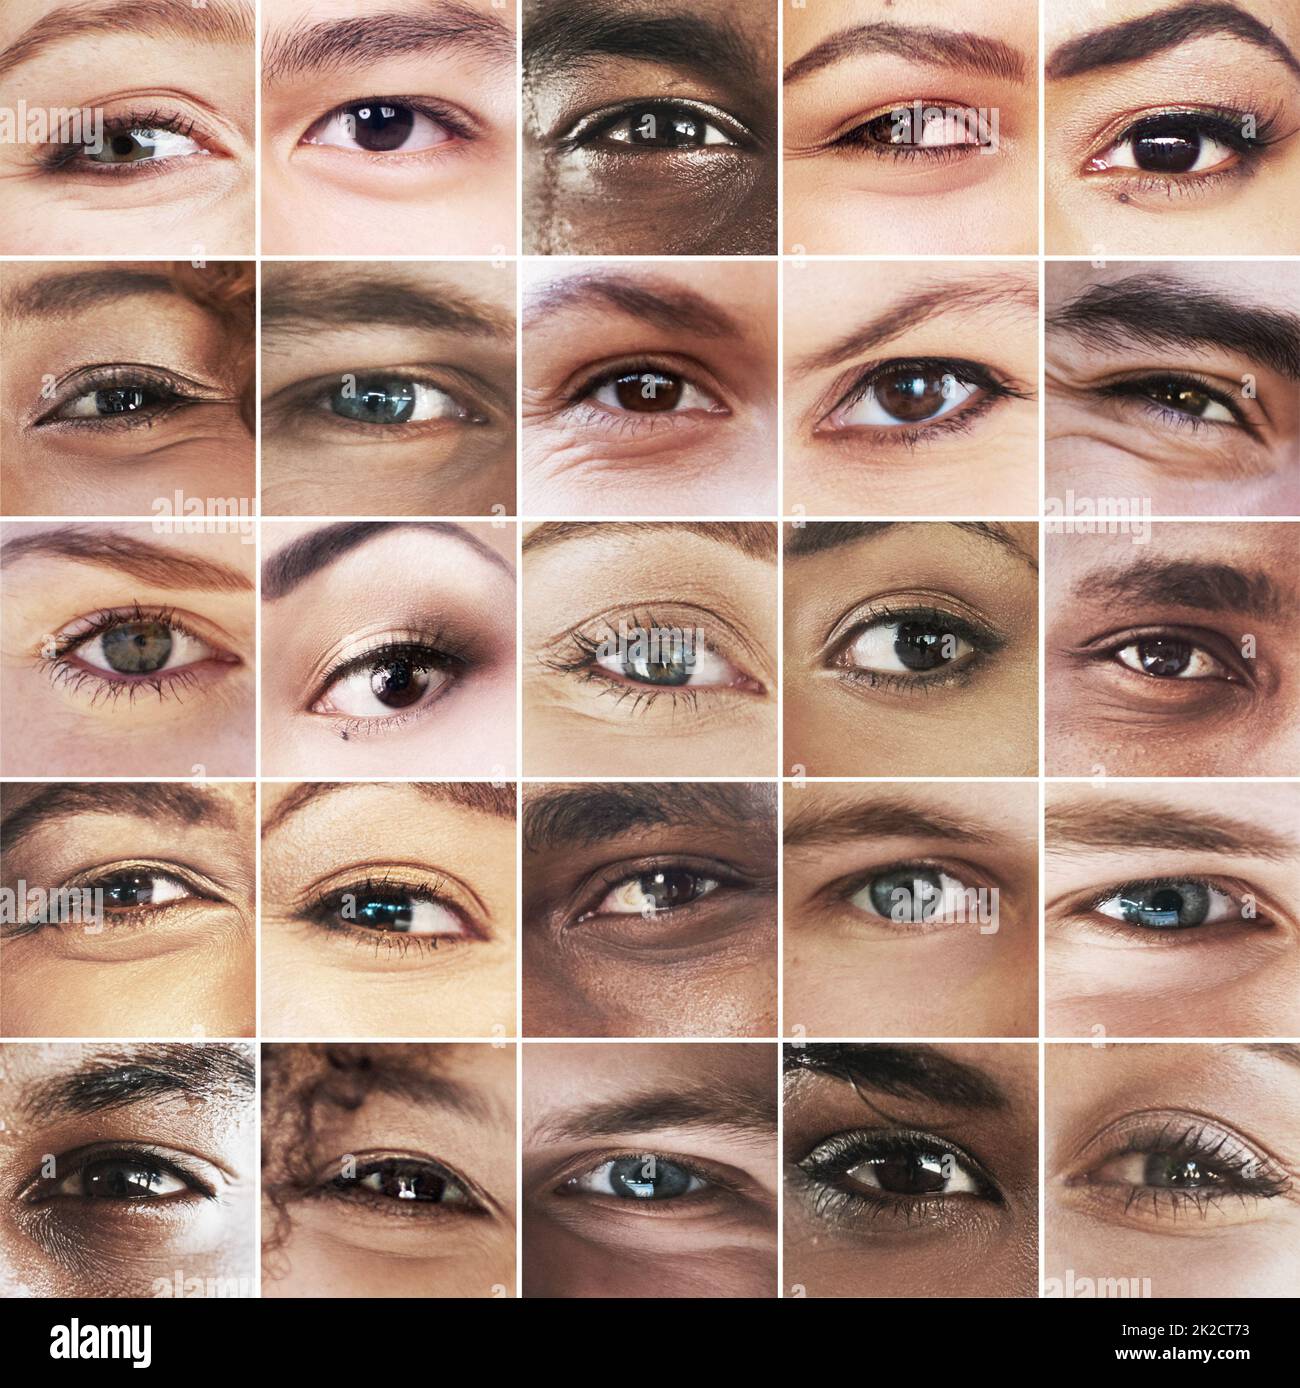 The eyes see all. Composite image of an assortment of peoples eyes. Stock Photo